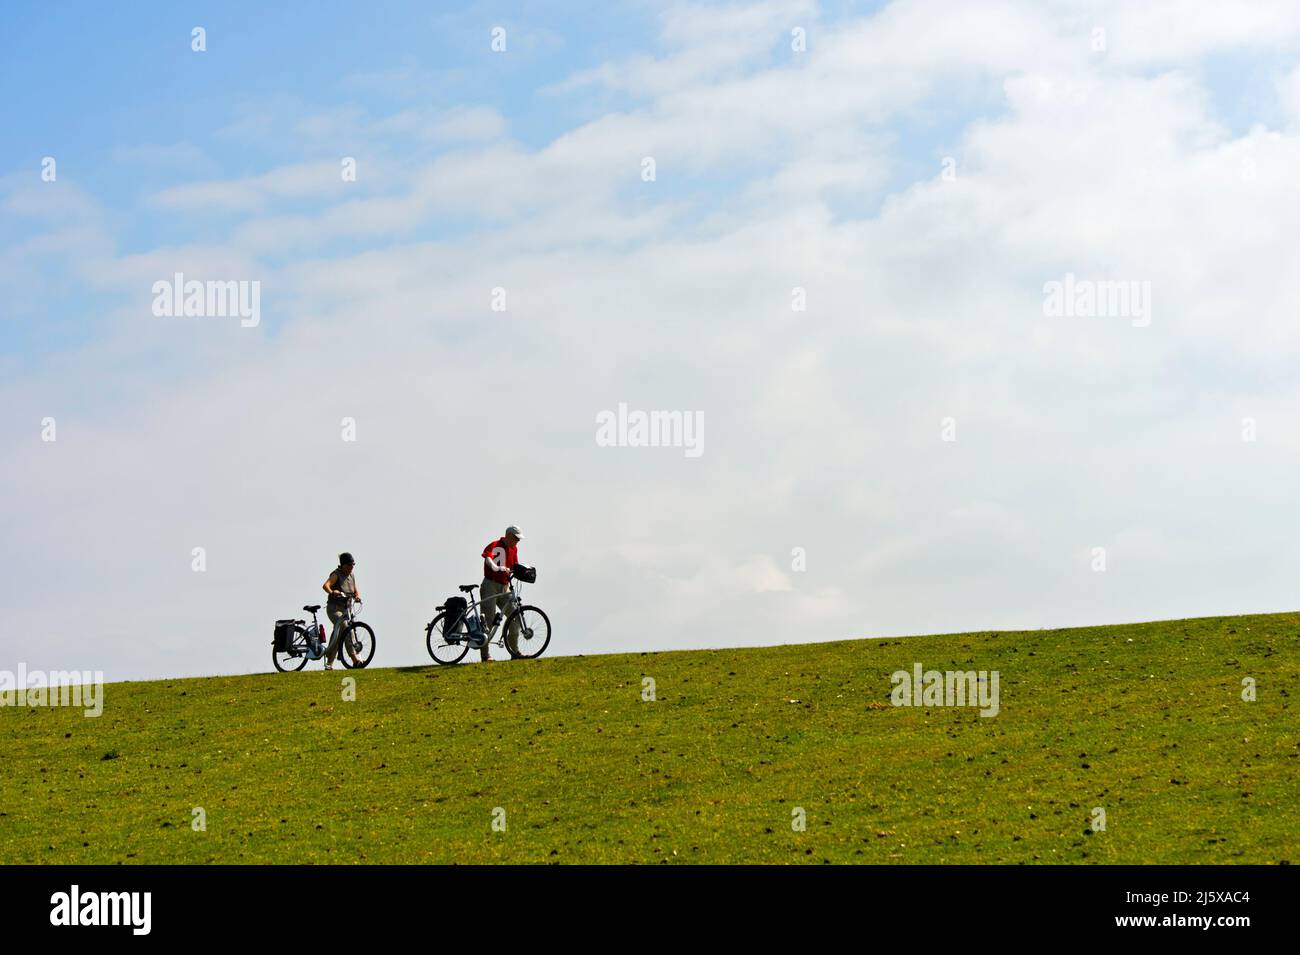 Two cyclists push their bikes on a dyke crest, Schleswig-Holstein Wadden Sea National Park, Westerhever, Schleswig-Holstein, Germany Stock Photo